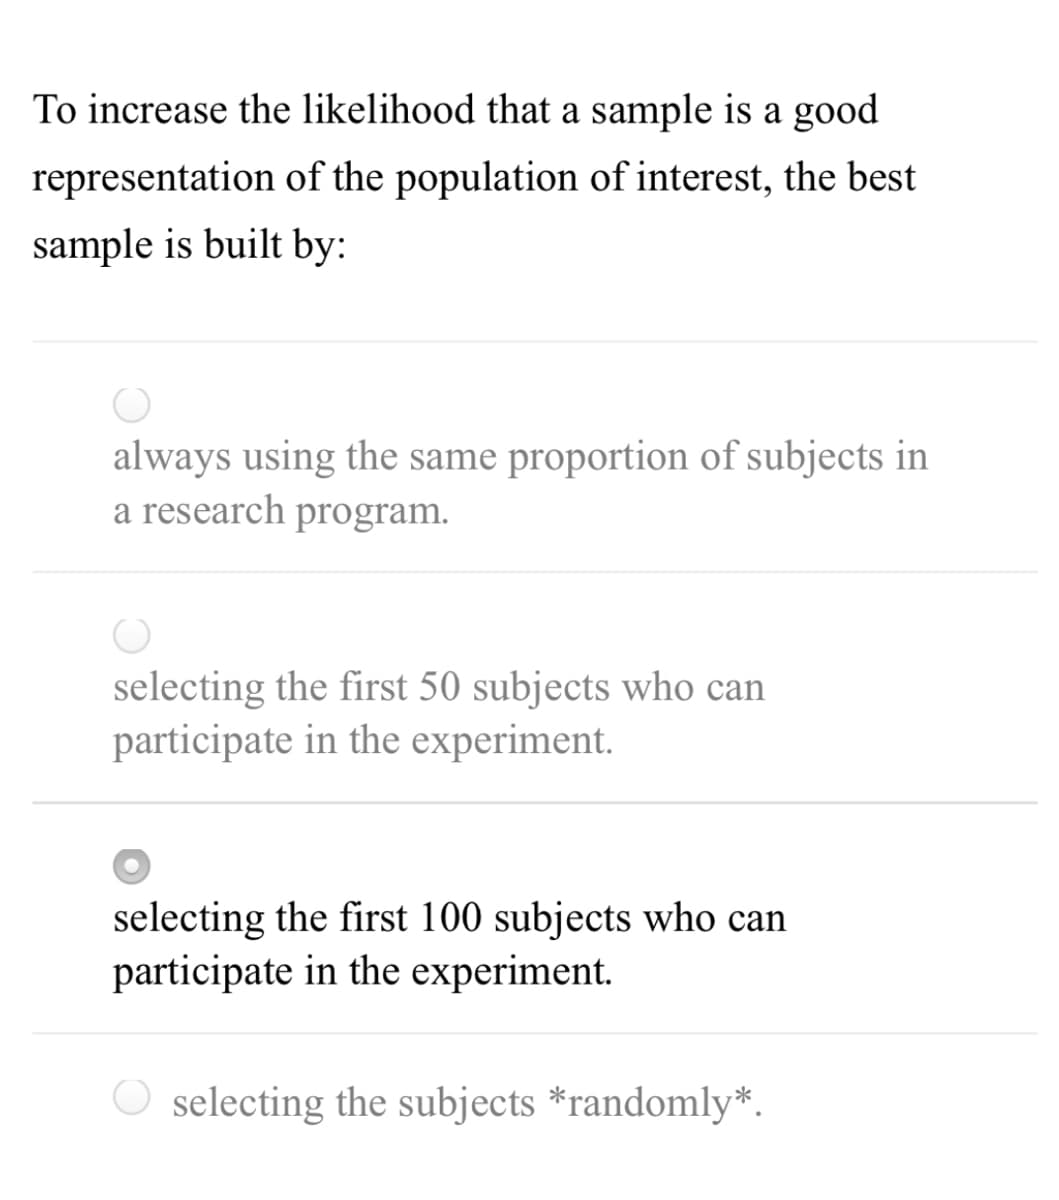 To increase the likelihood that a sample is a good
representation of the population of interest, the best
sample is built by:
always using the same proportion of subjects in
a research program.
selecting the first 50 subjects who can
participate in the experiment.
selecting the first 100 subjects who can
participate in the experiment.
O selecting the subjects *randomly*.
